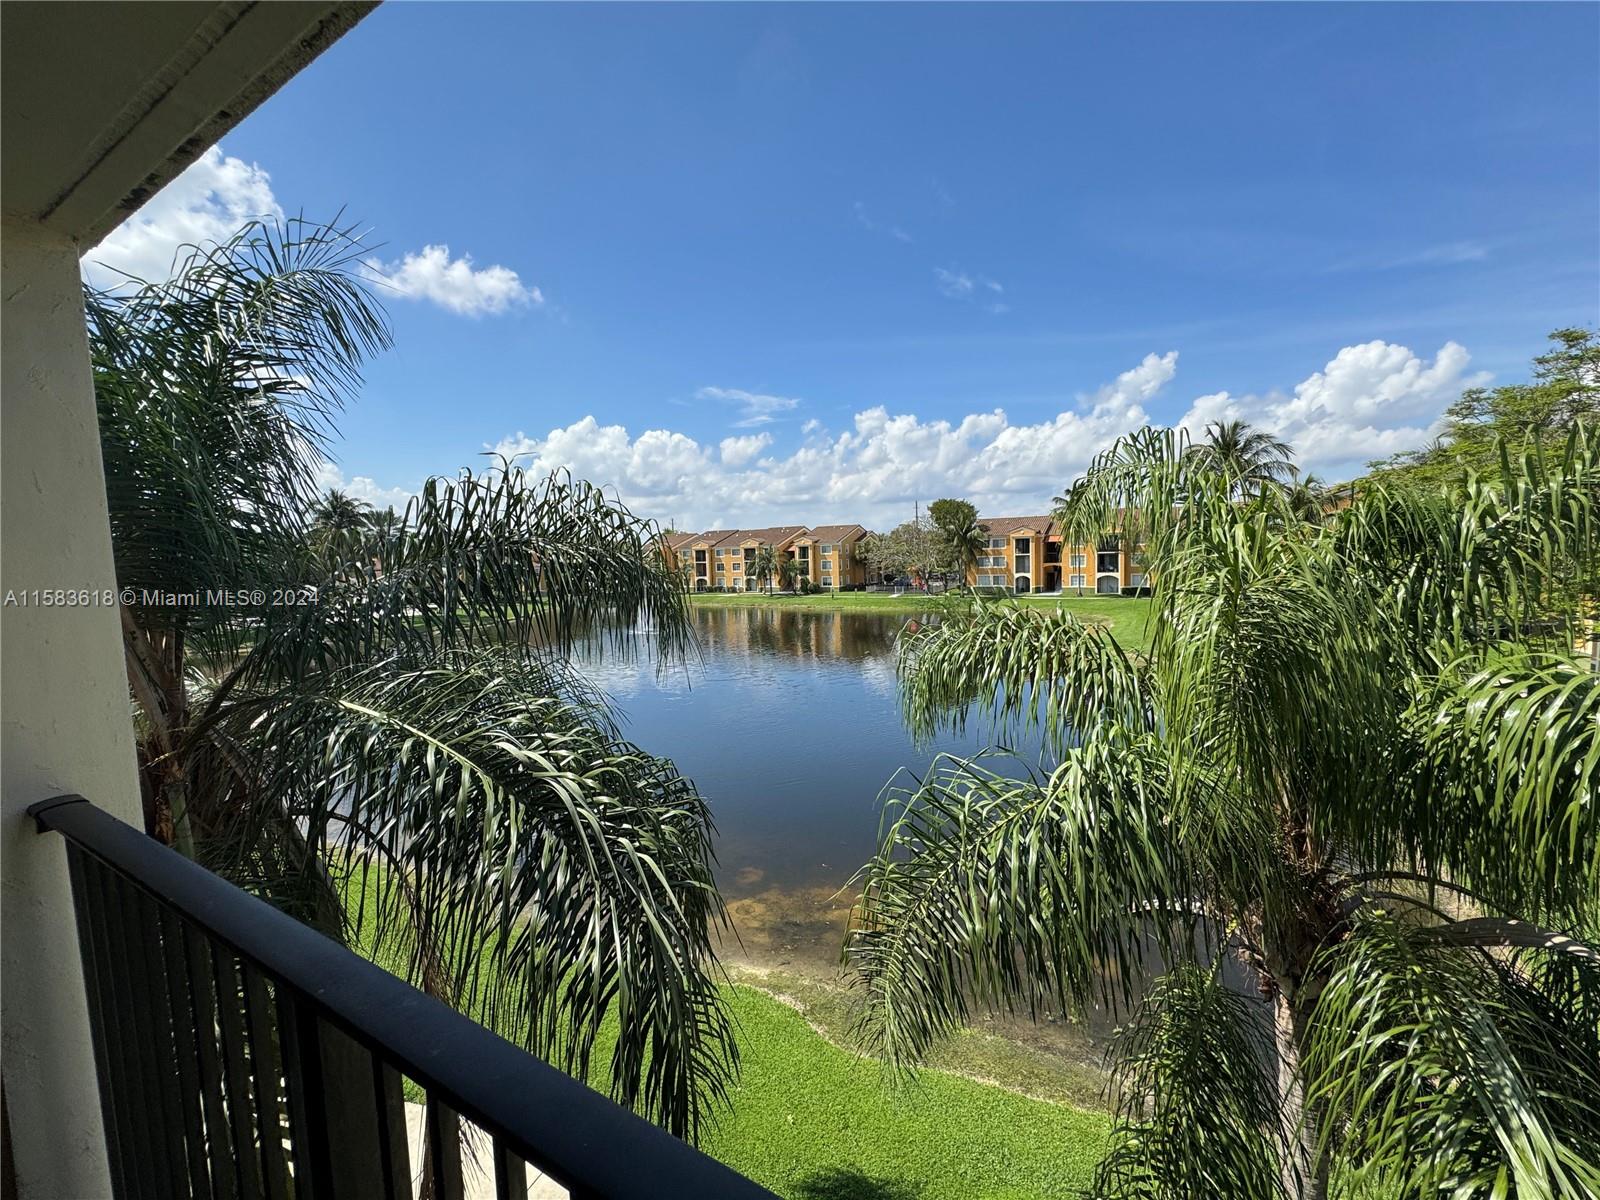 a view of a lake from a balcony